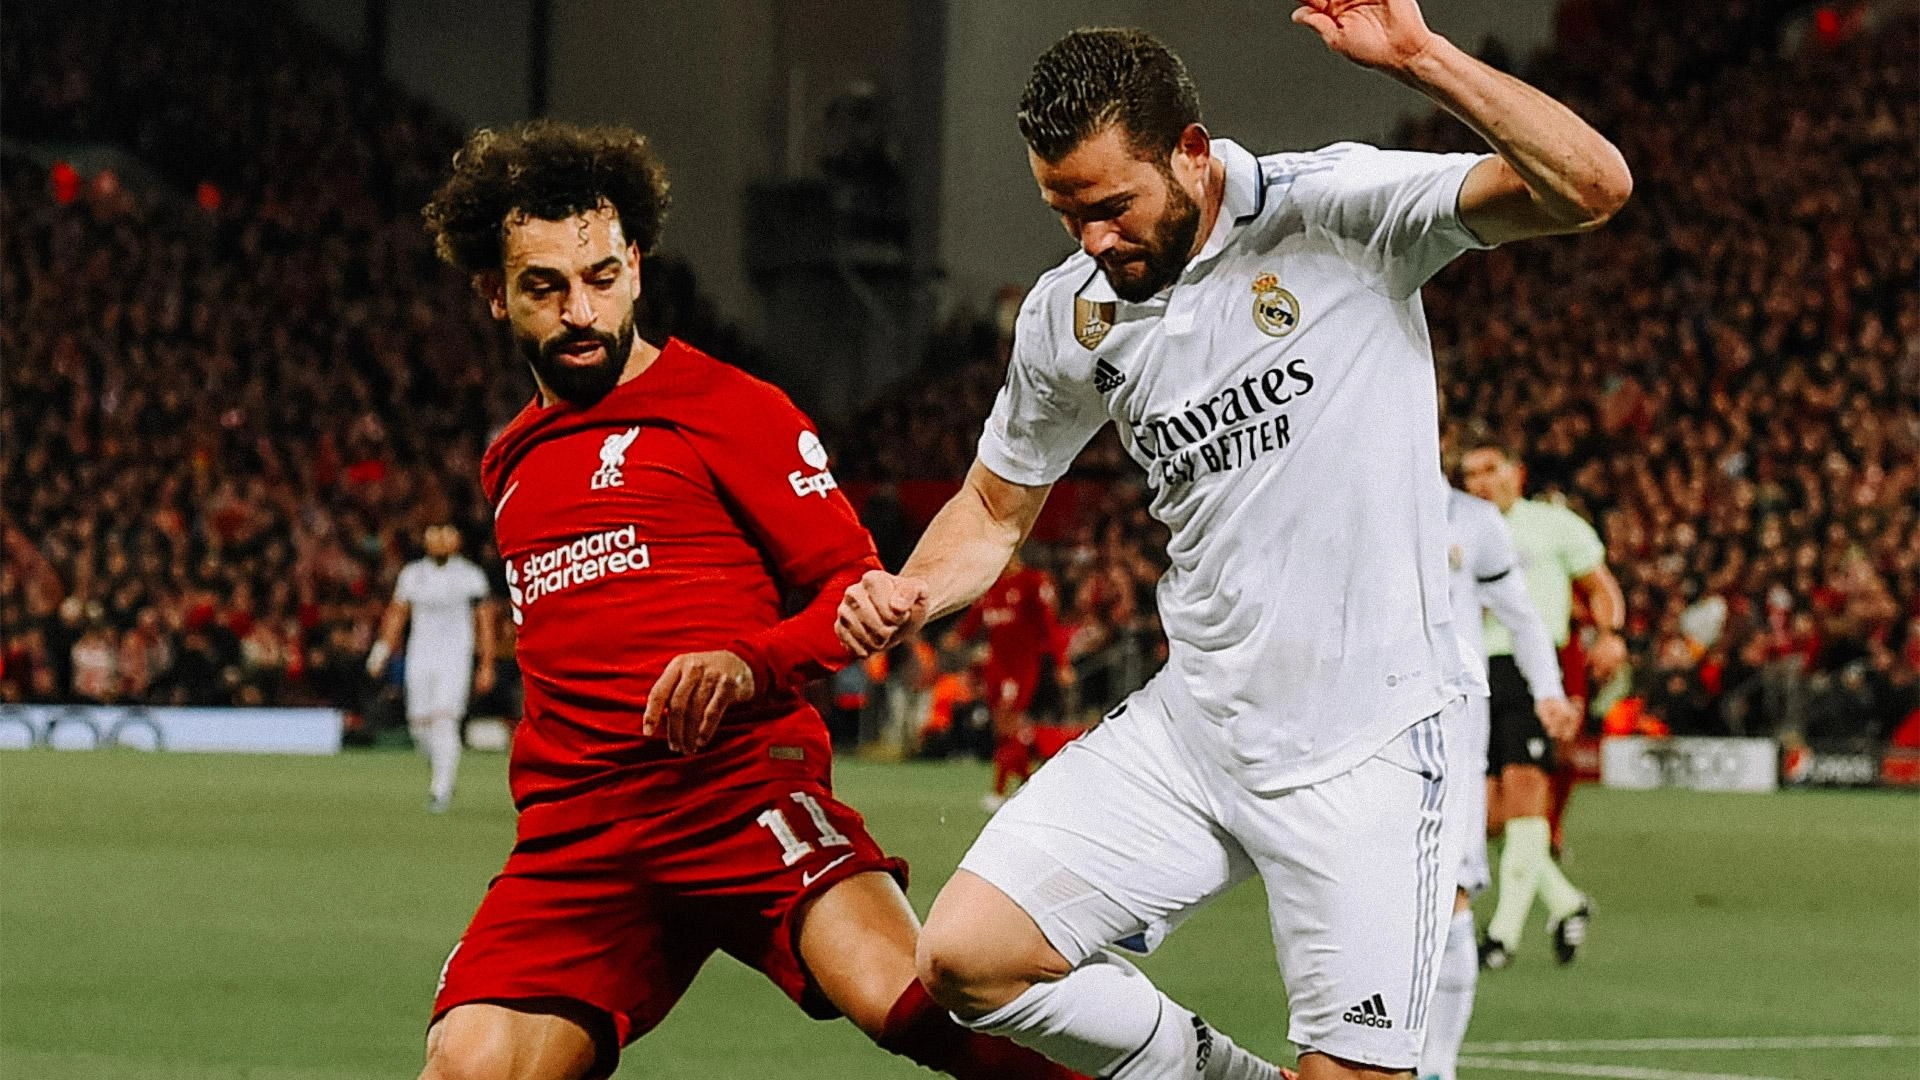 Real Madrid v Liverpool: Nine interesting stats ahead of Champions League tie - Liverpool FC